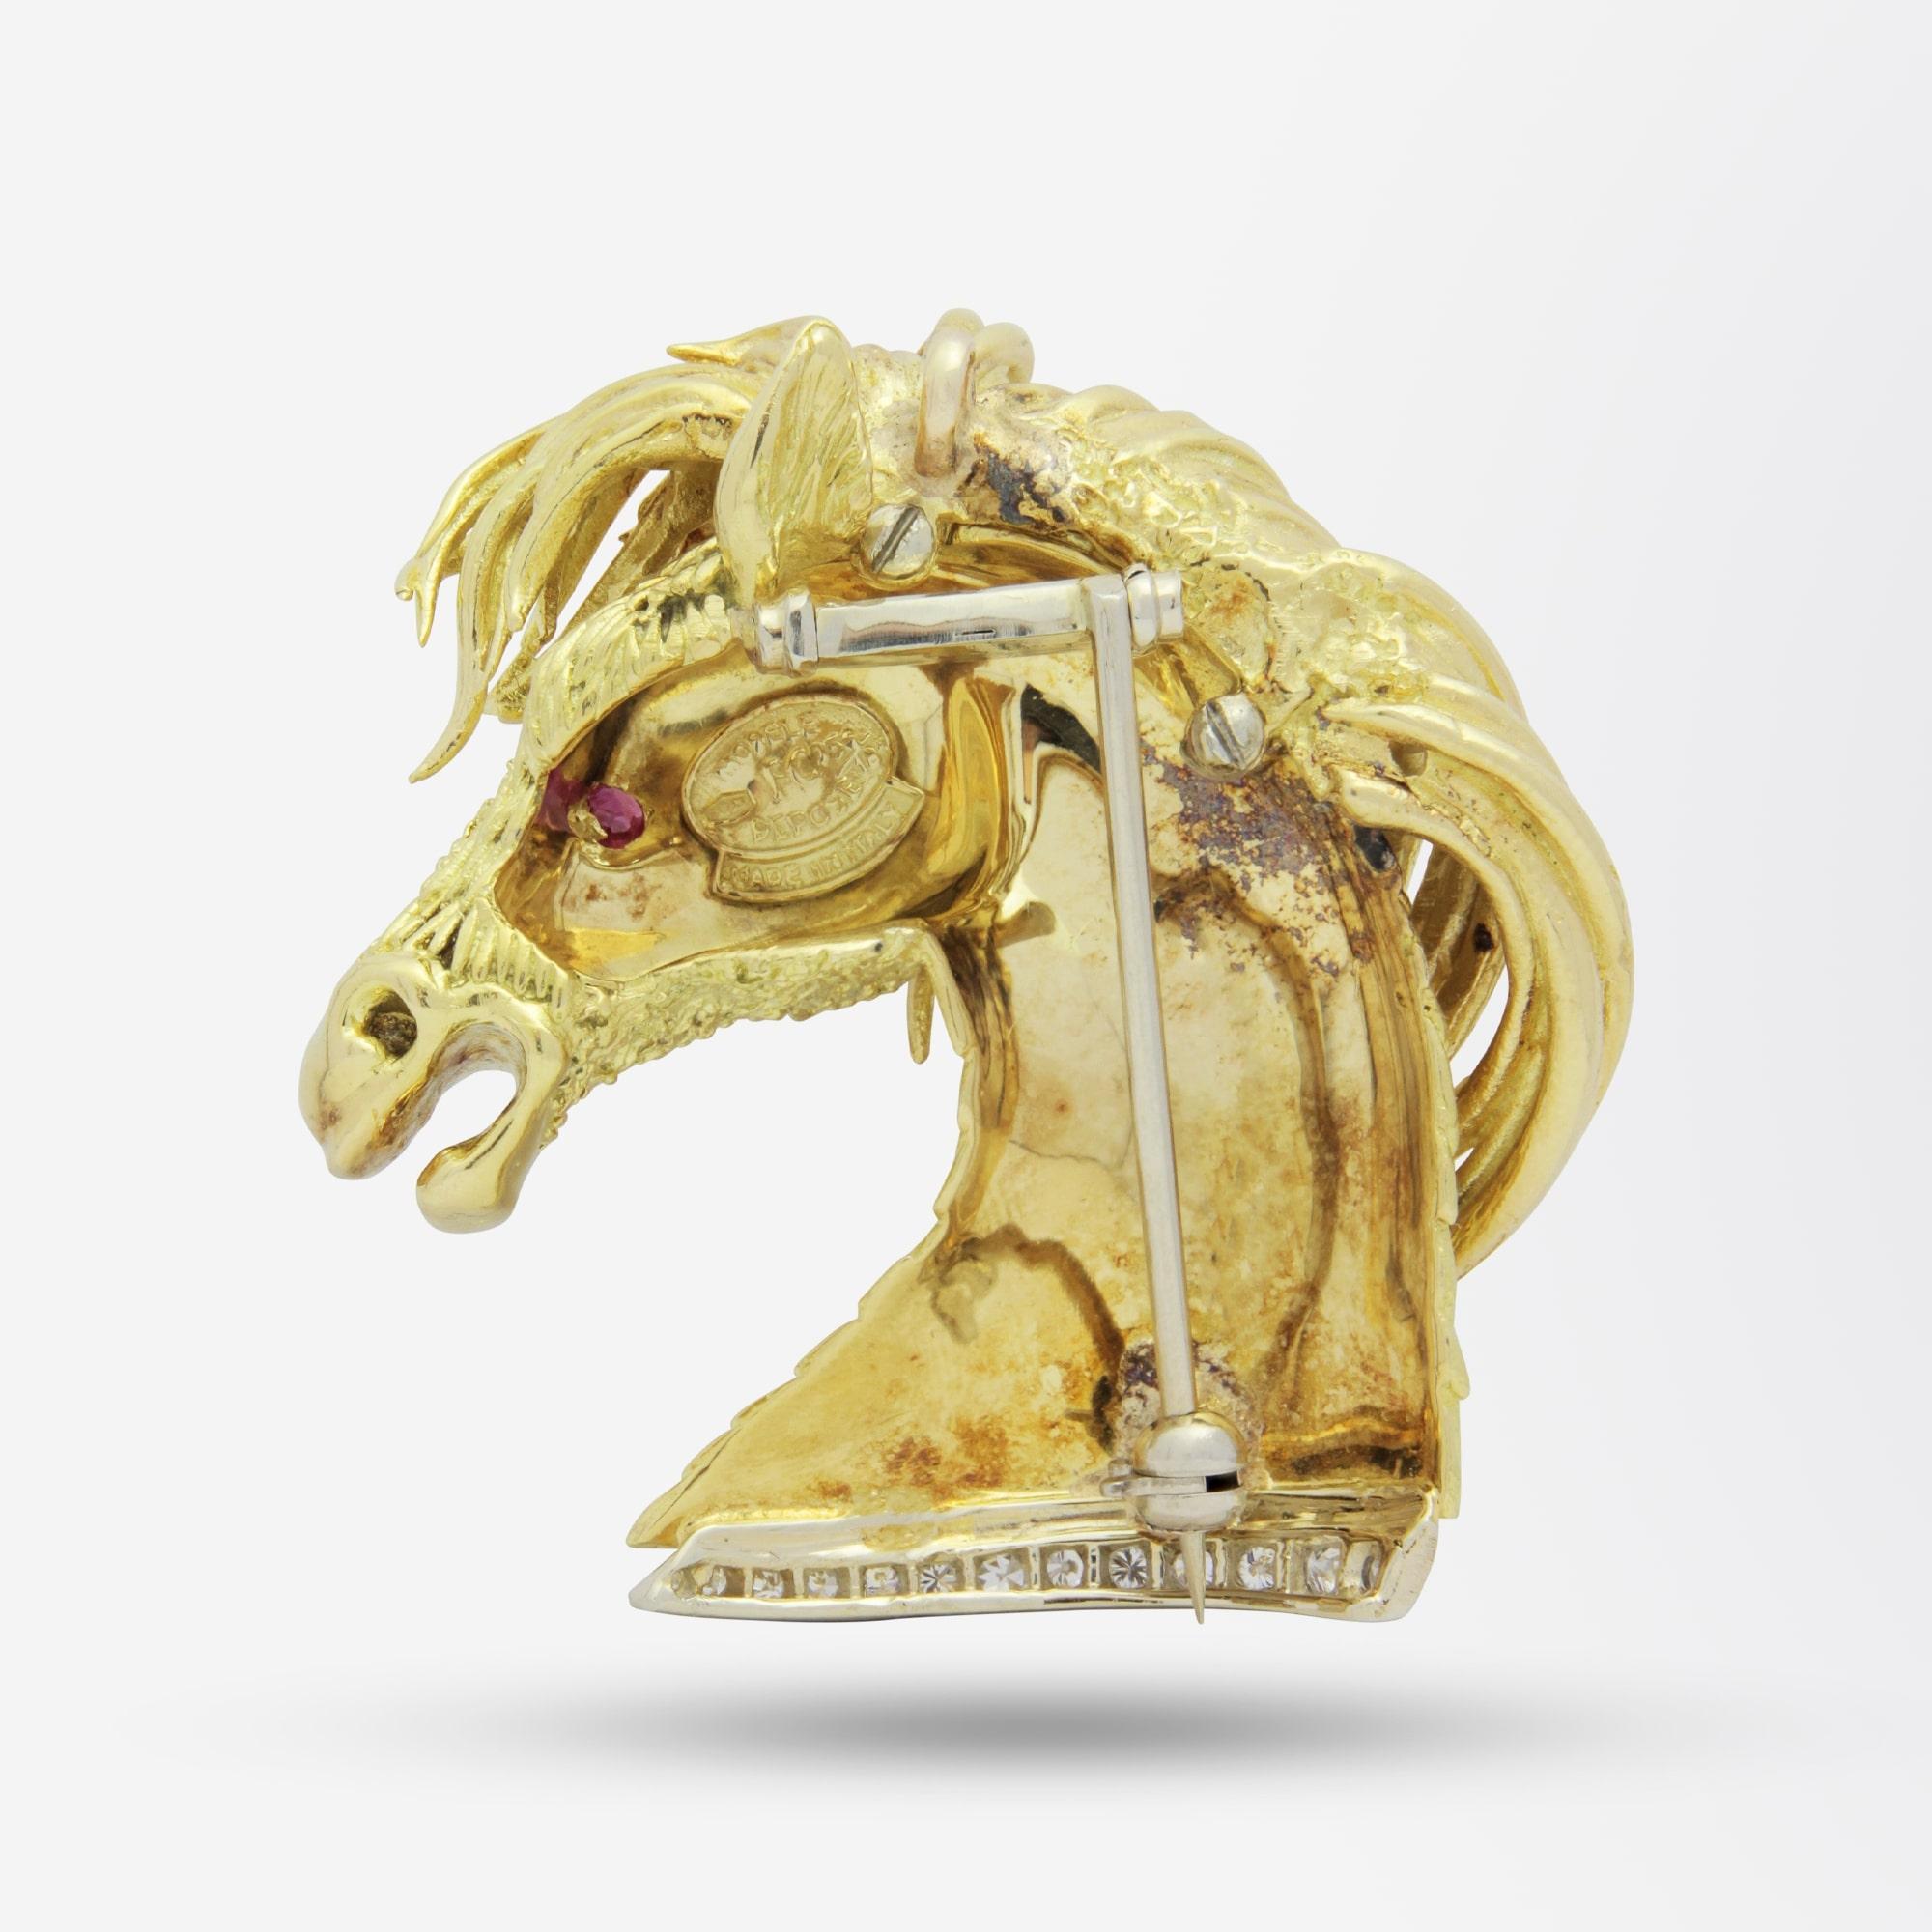 An exceptional horse head brooch pendant made by Pierino Frascarolo (1928-1976) who was an Italian jeweller producing incredible work in the mid 20th century. The 18 karat yellow gold brooch is heavily textured and has been manufactured in two